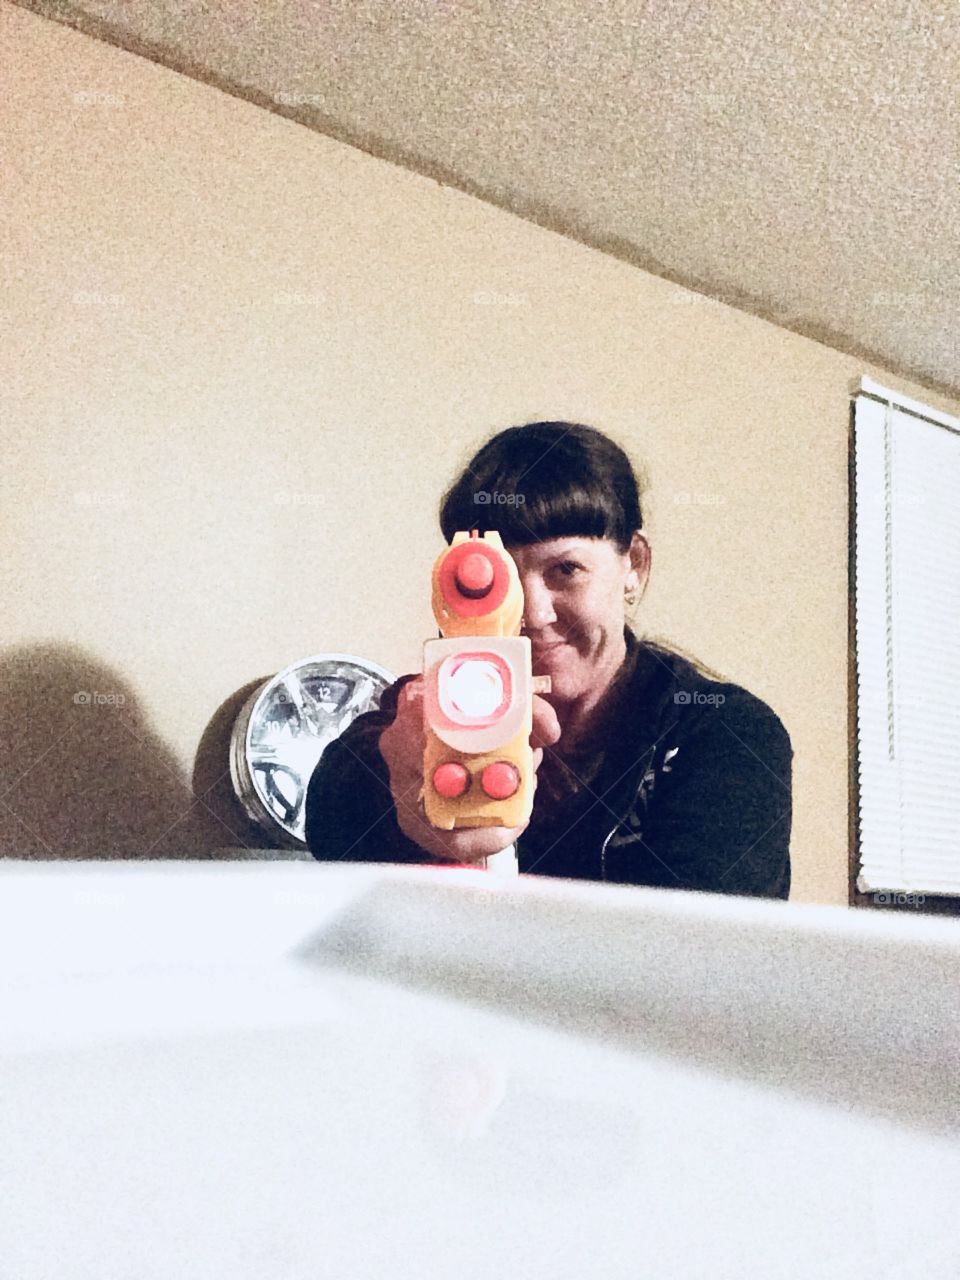 With her target locked in with a laser sight, a woman smirks as she gently squeezes the trigger on a well loaded nerf gun. 